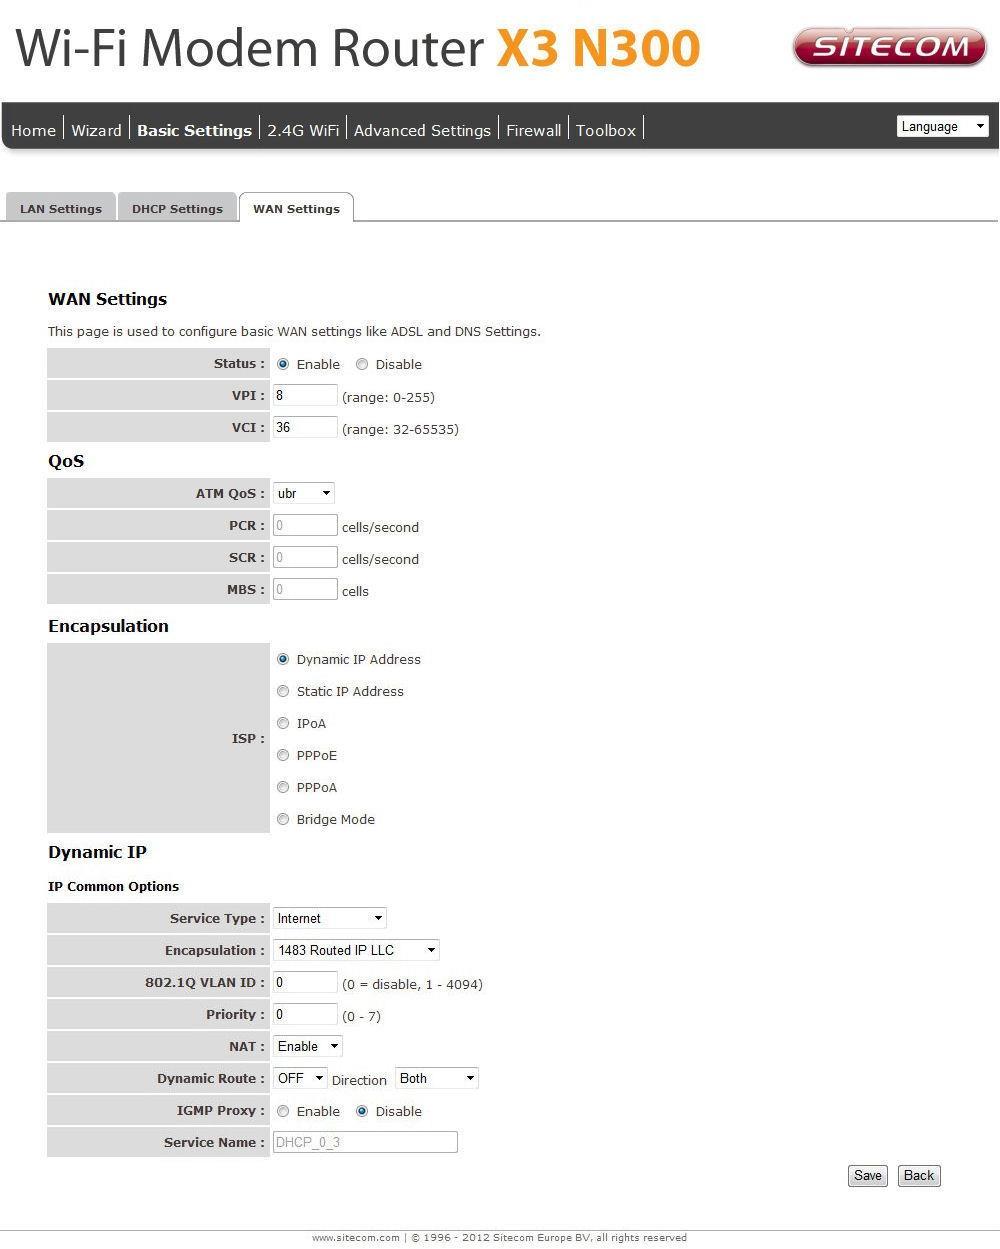 WAN Settings This page allows you to manually configure the ADSL/WAN settings. The settings on this page require some knowledge concerning the WAN configuration.